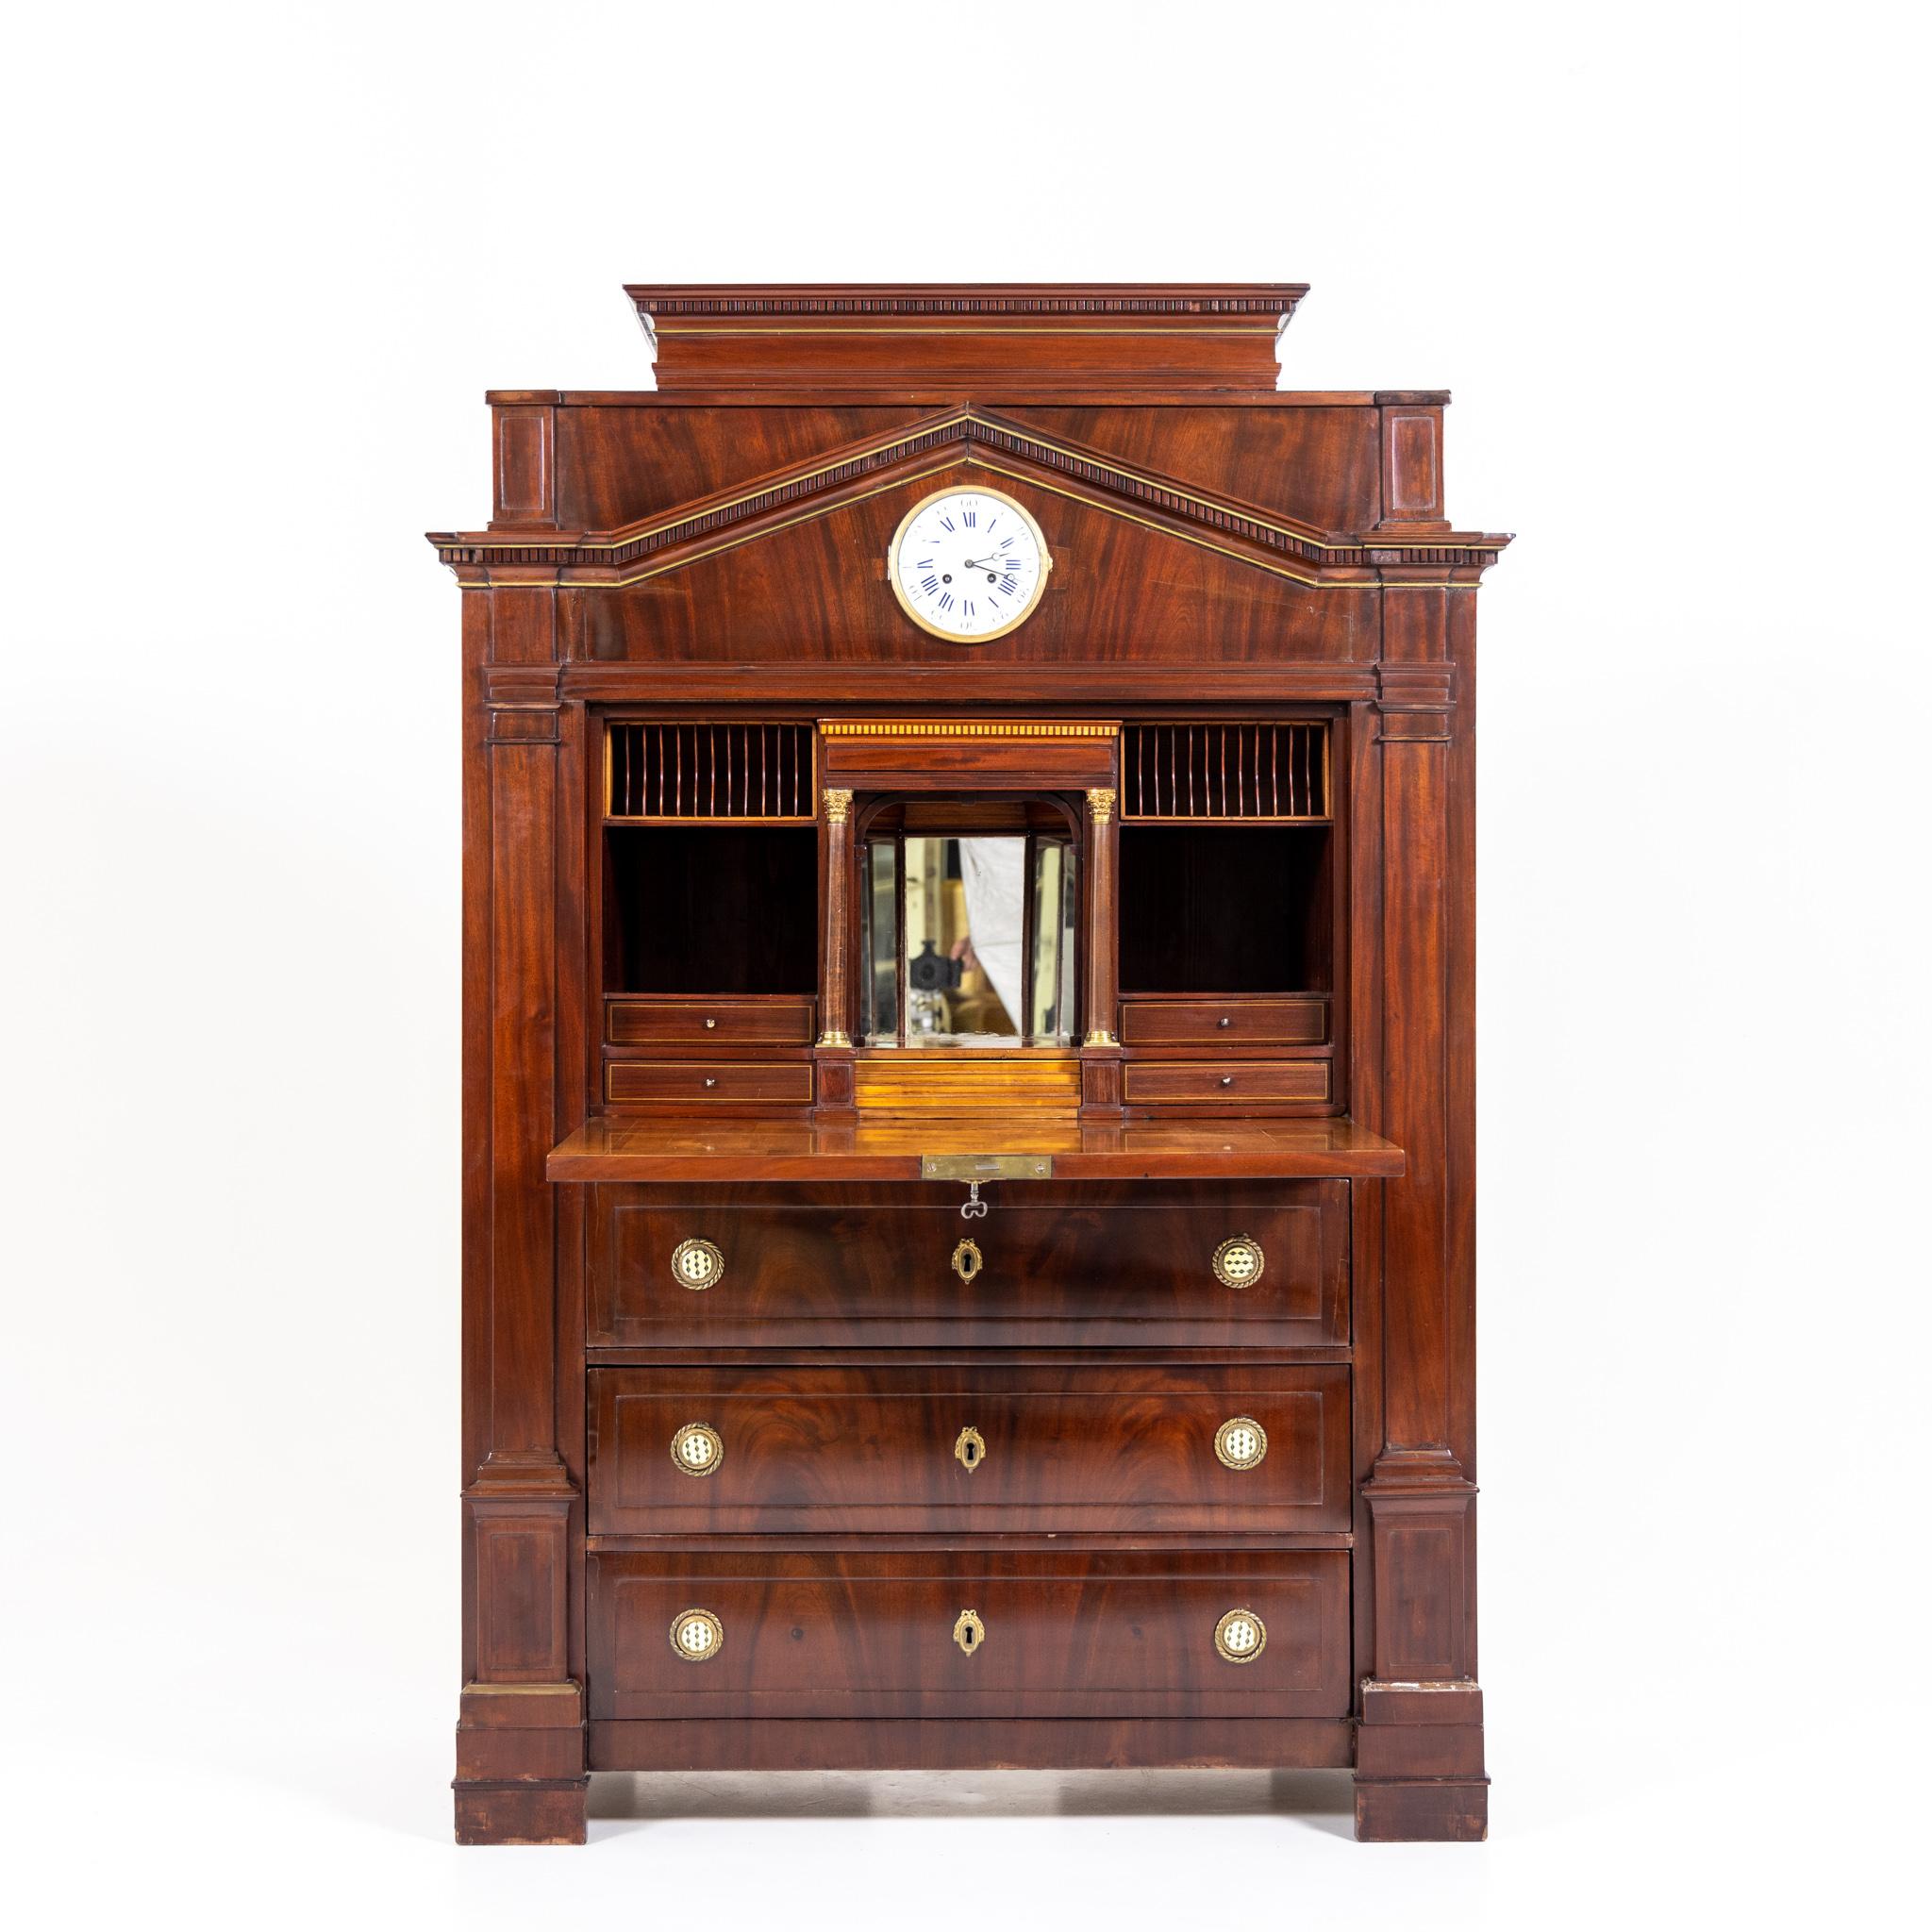 Secretaire with three drawers veneered in mahogany with enameled clock face in the tympanum field of the pedimented top with dentil frieze and brass moldings. Interior division consists of several letter compartments and drawers around a central